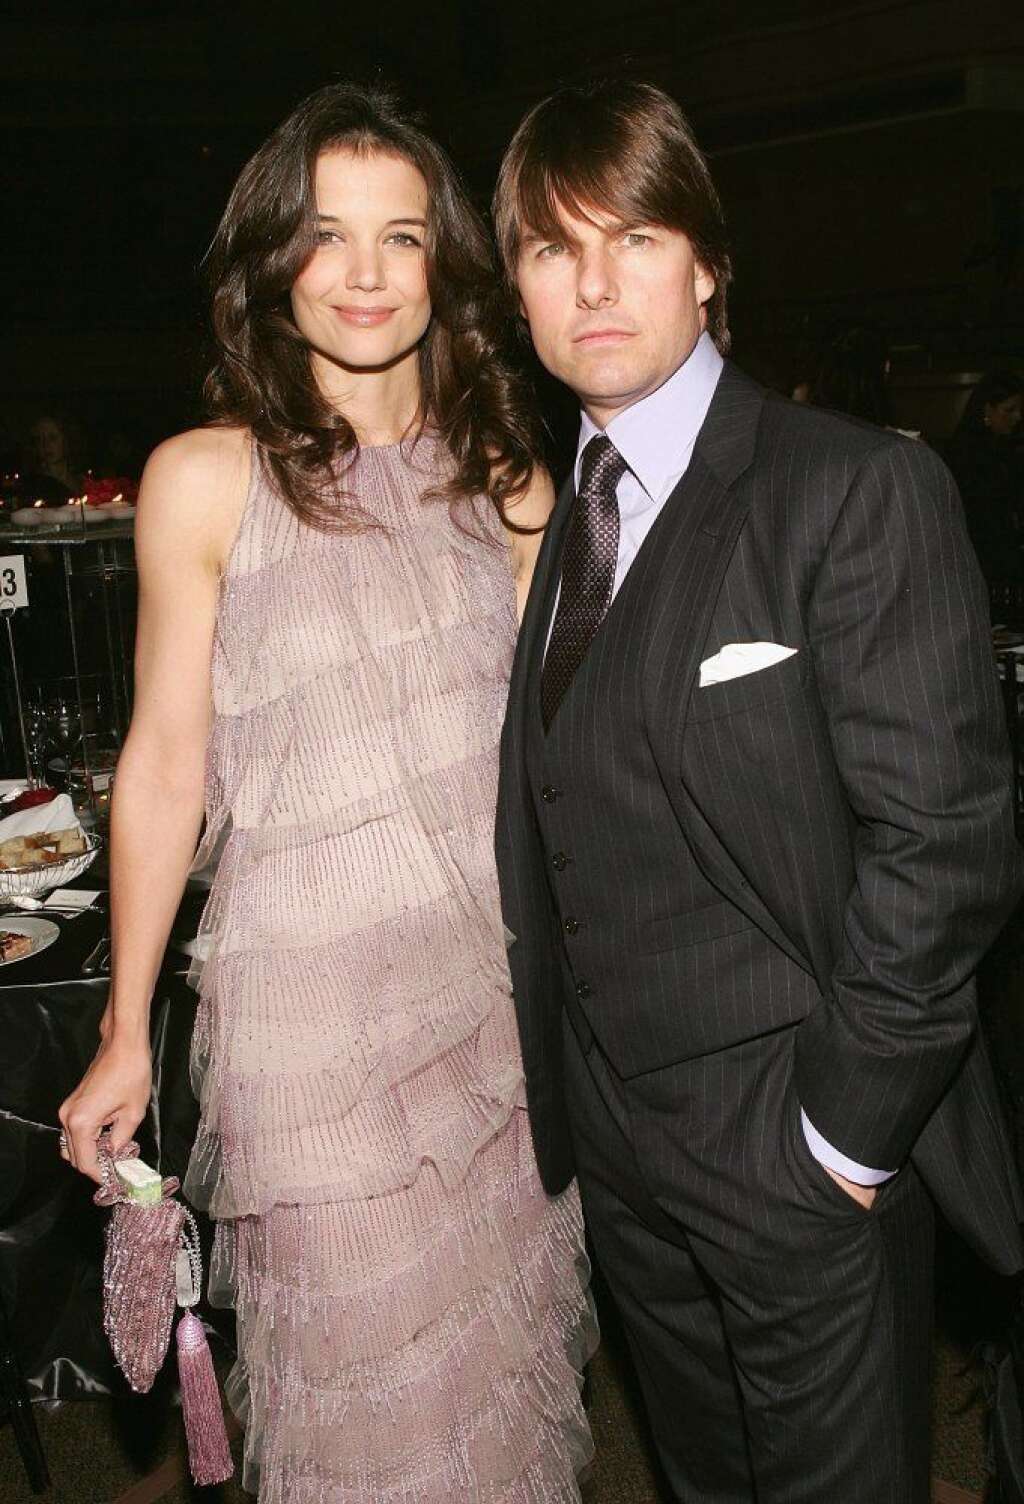 Tom Cruise & Katie Holmes - Photos from their relationship: 2005-2012